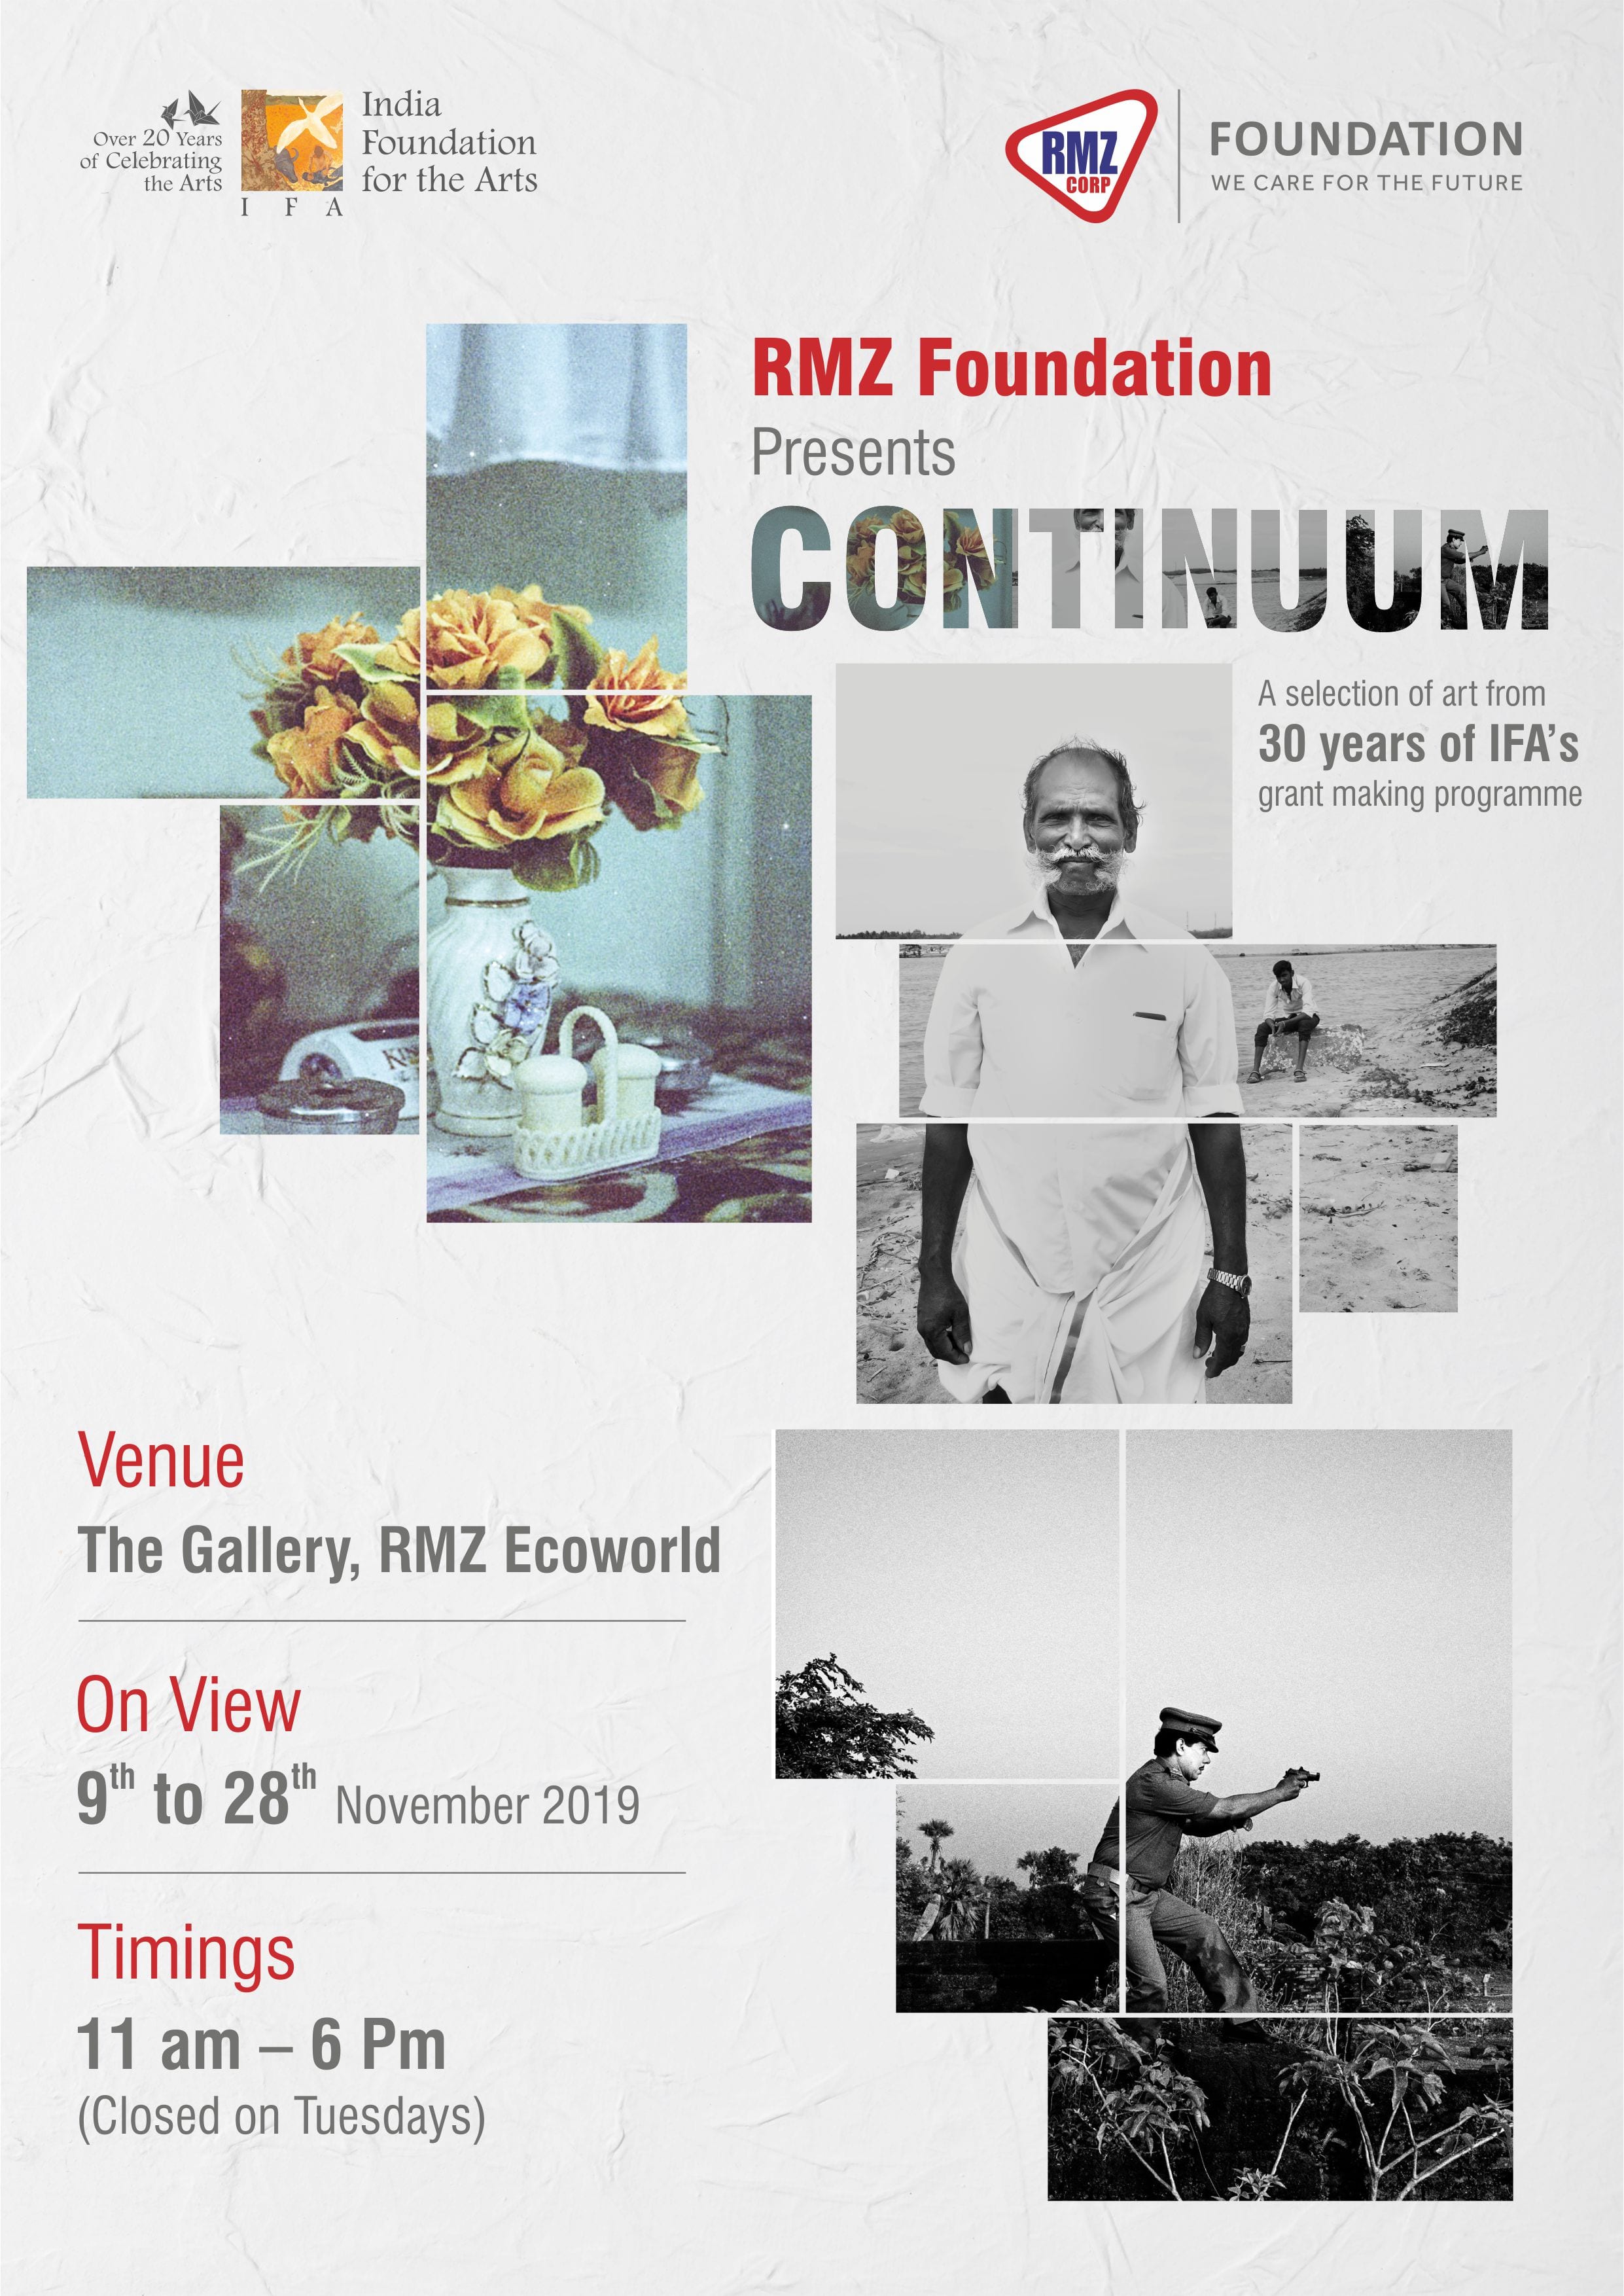 RMZ Foundation has collaborated with the India Foundation for the Arts IFA in presenting CONTINUUM